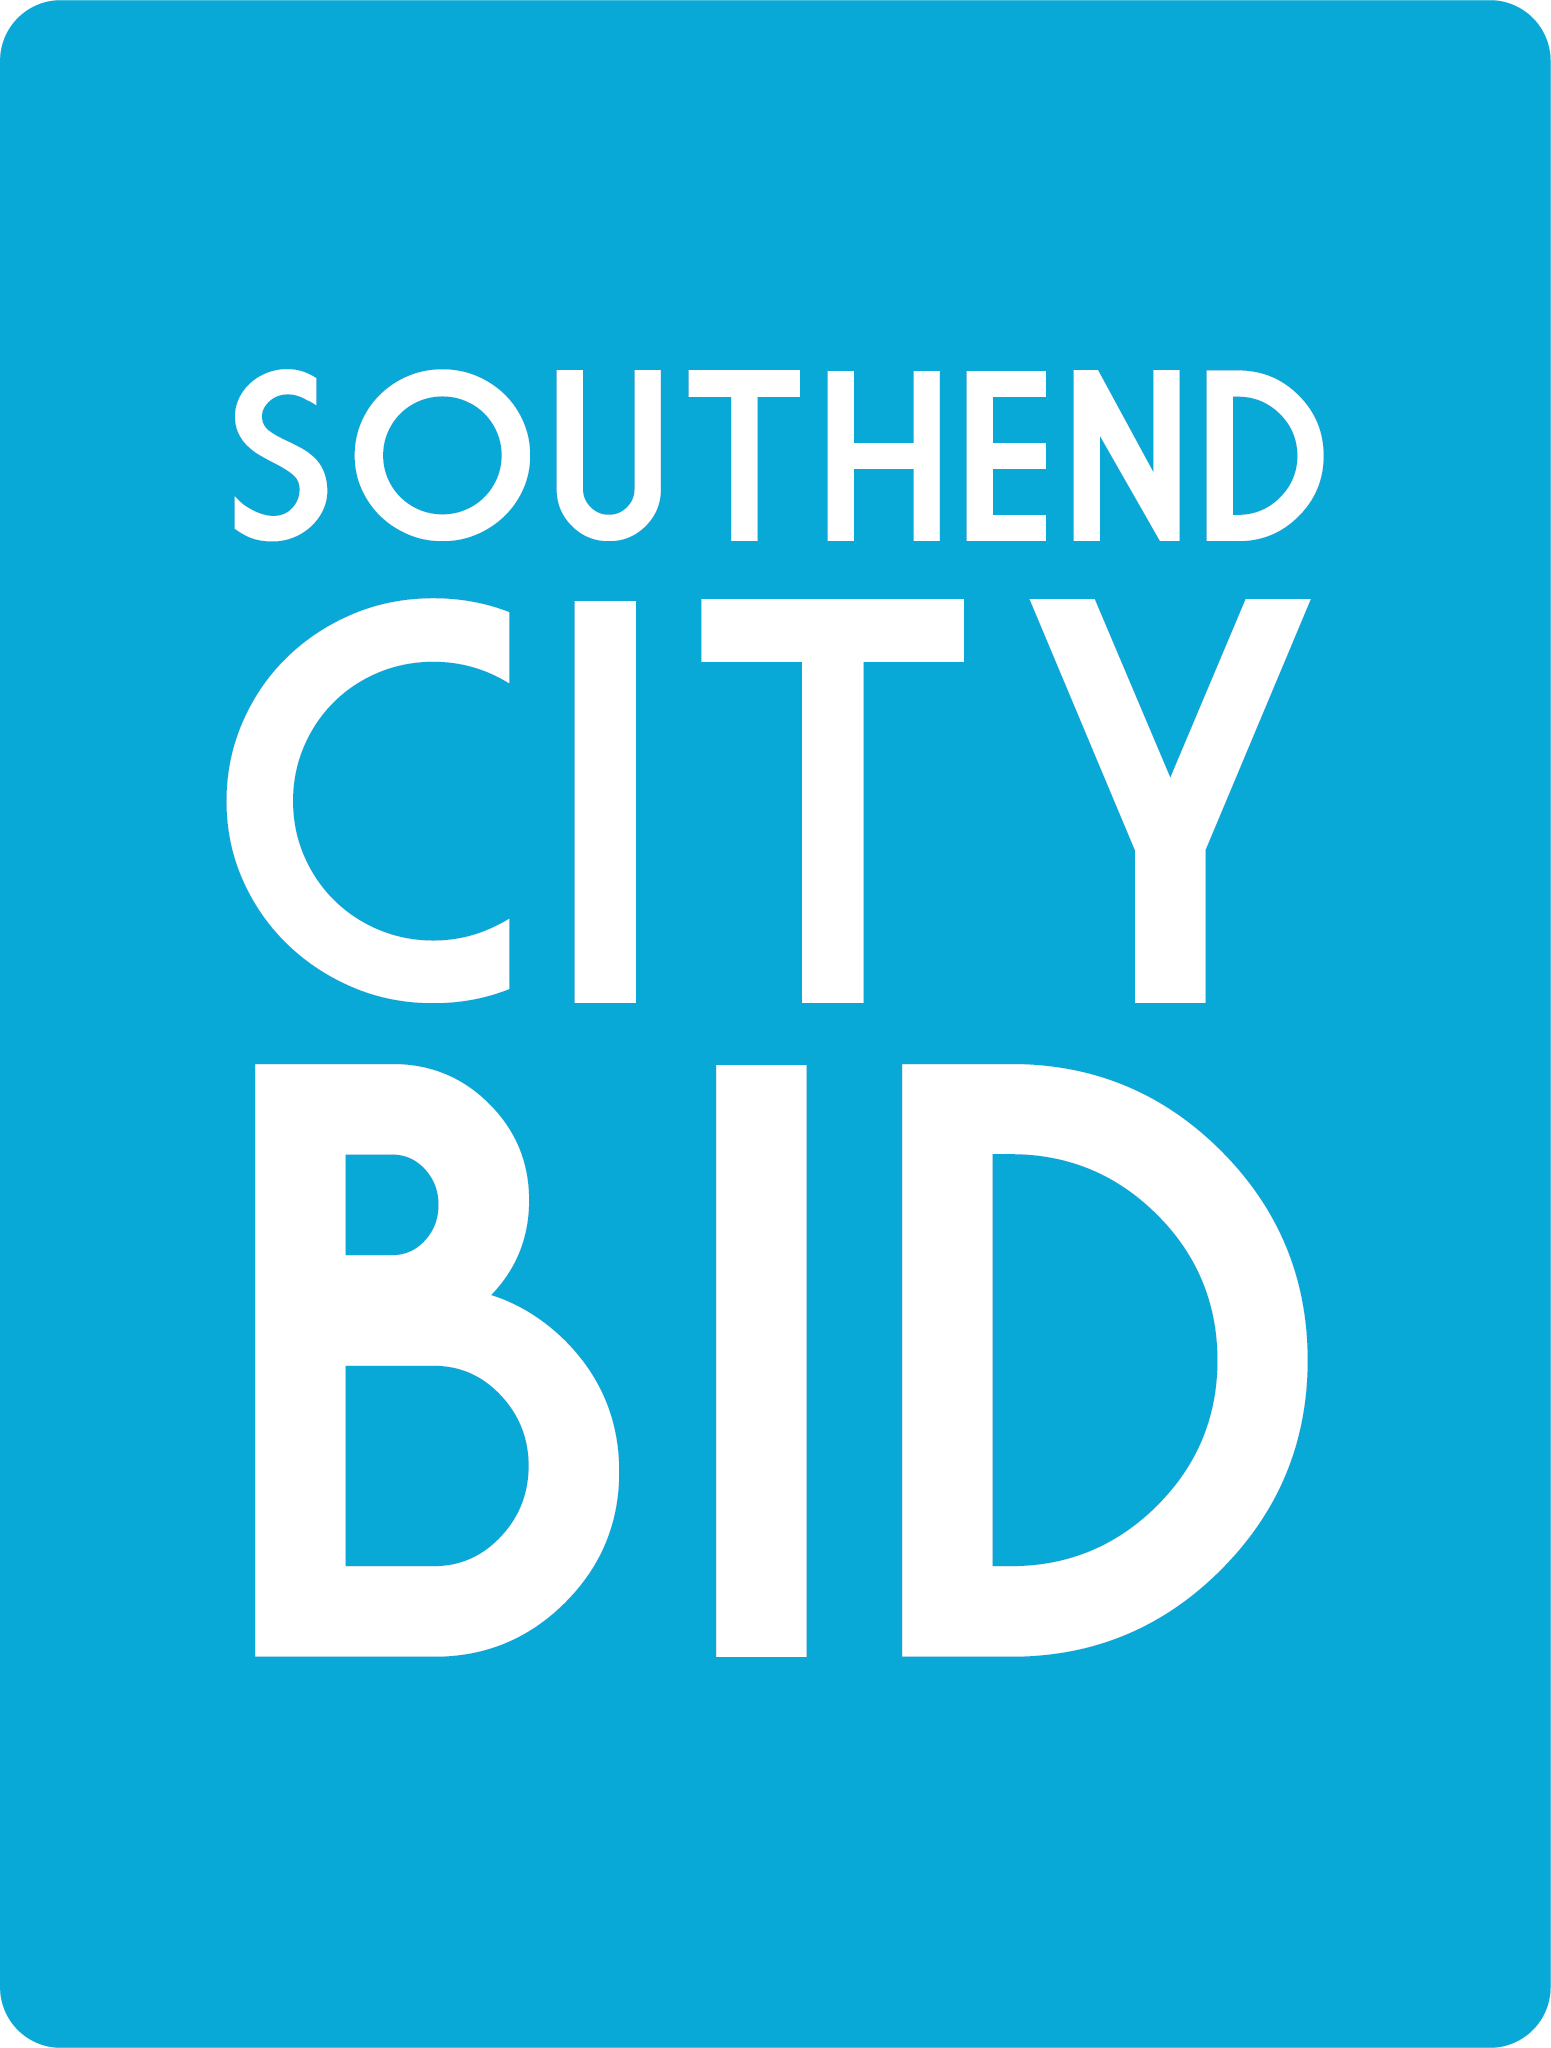 Southend City Bid text in white on a sky blue background